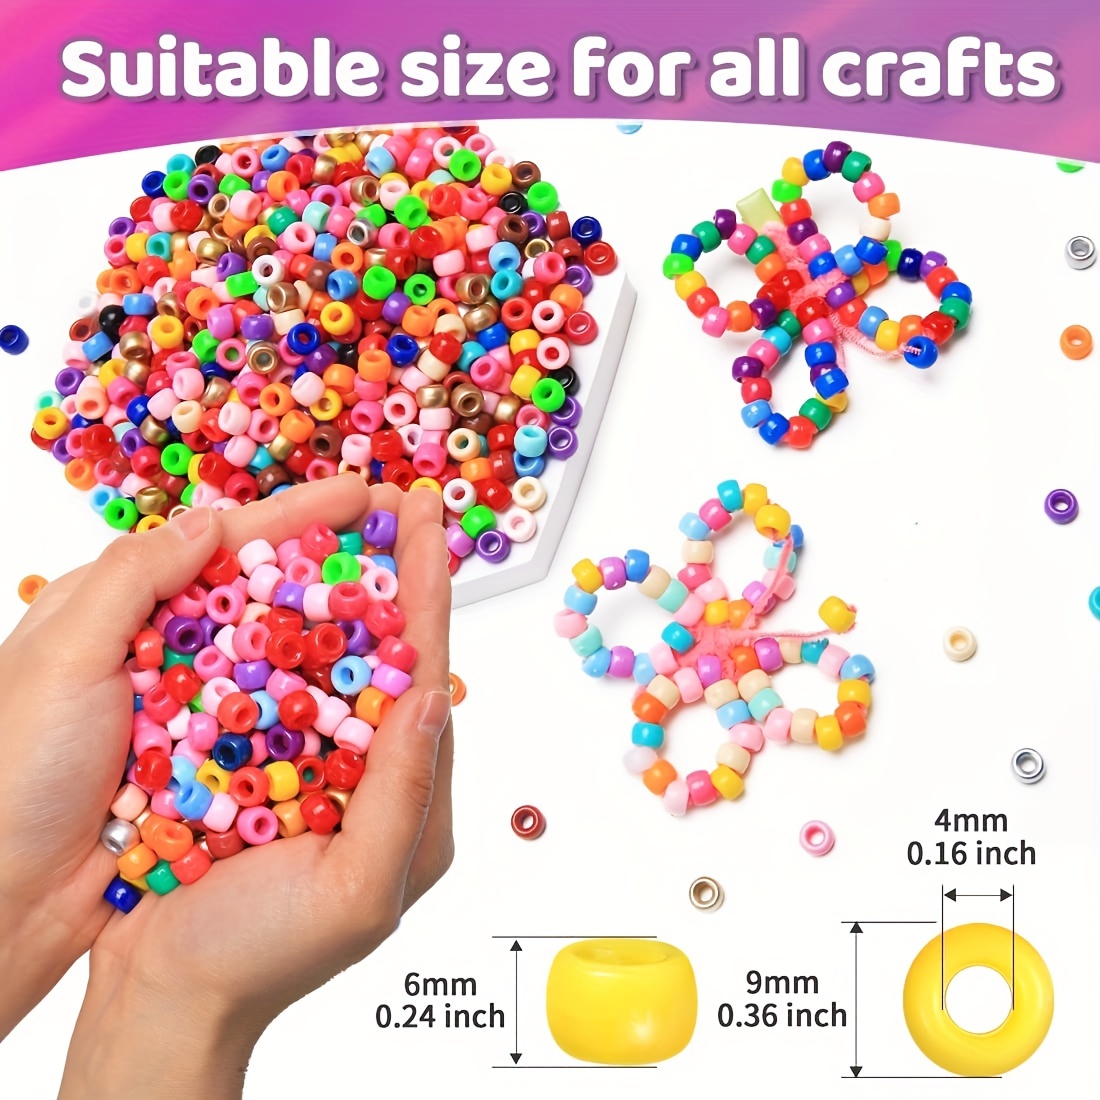 Simetufy 1200 Pcs Pony Beads Plastic Beads for Bracelet Making, Multi-Colored Beads for Hair Braiding, DIY Crafts, Kandi Jewelry, Key Chains and Ornam